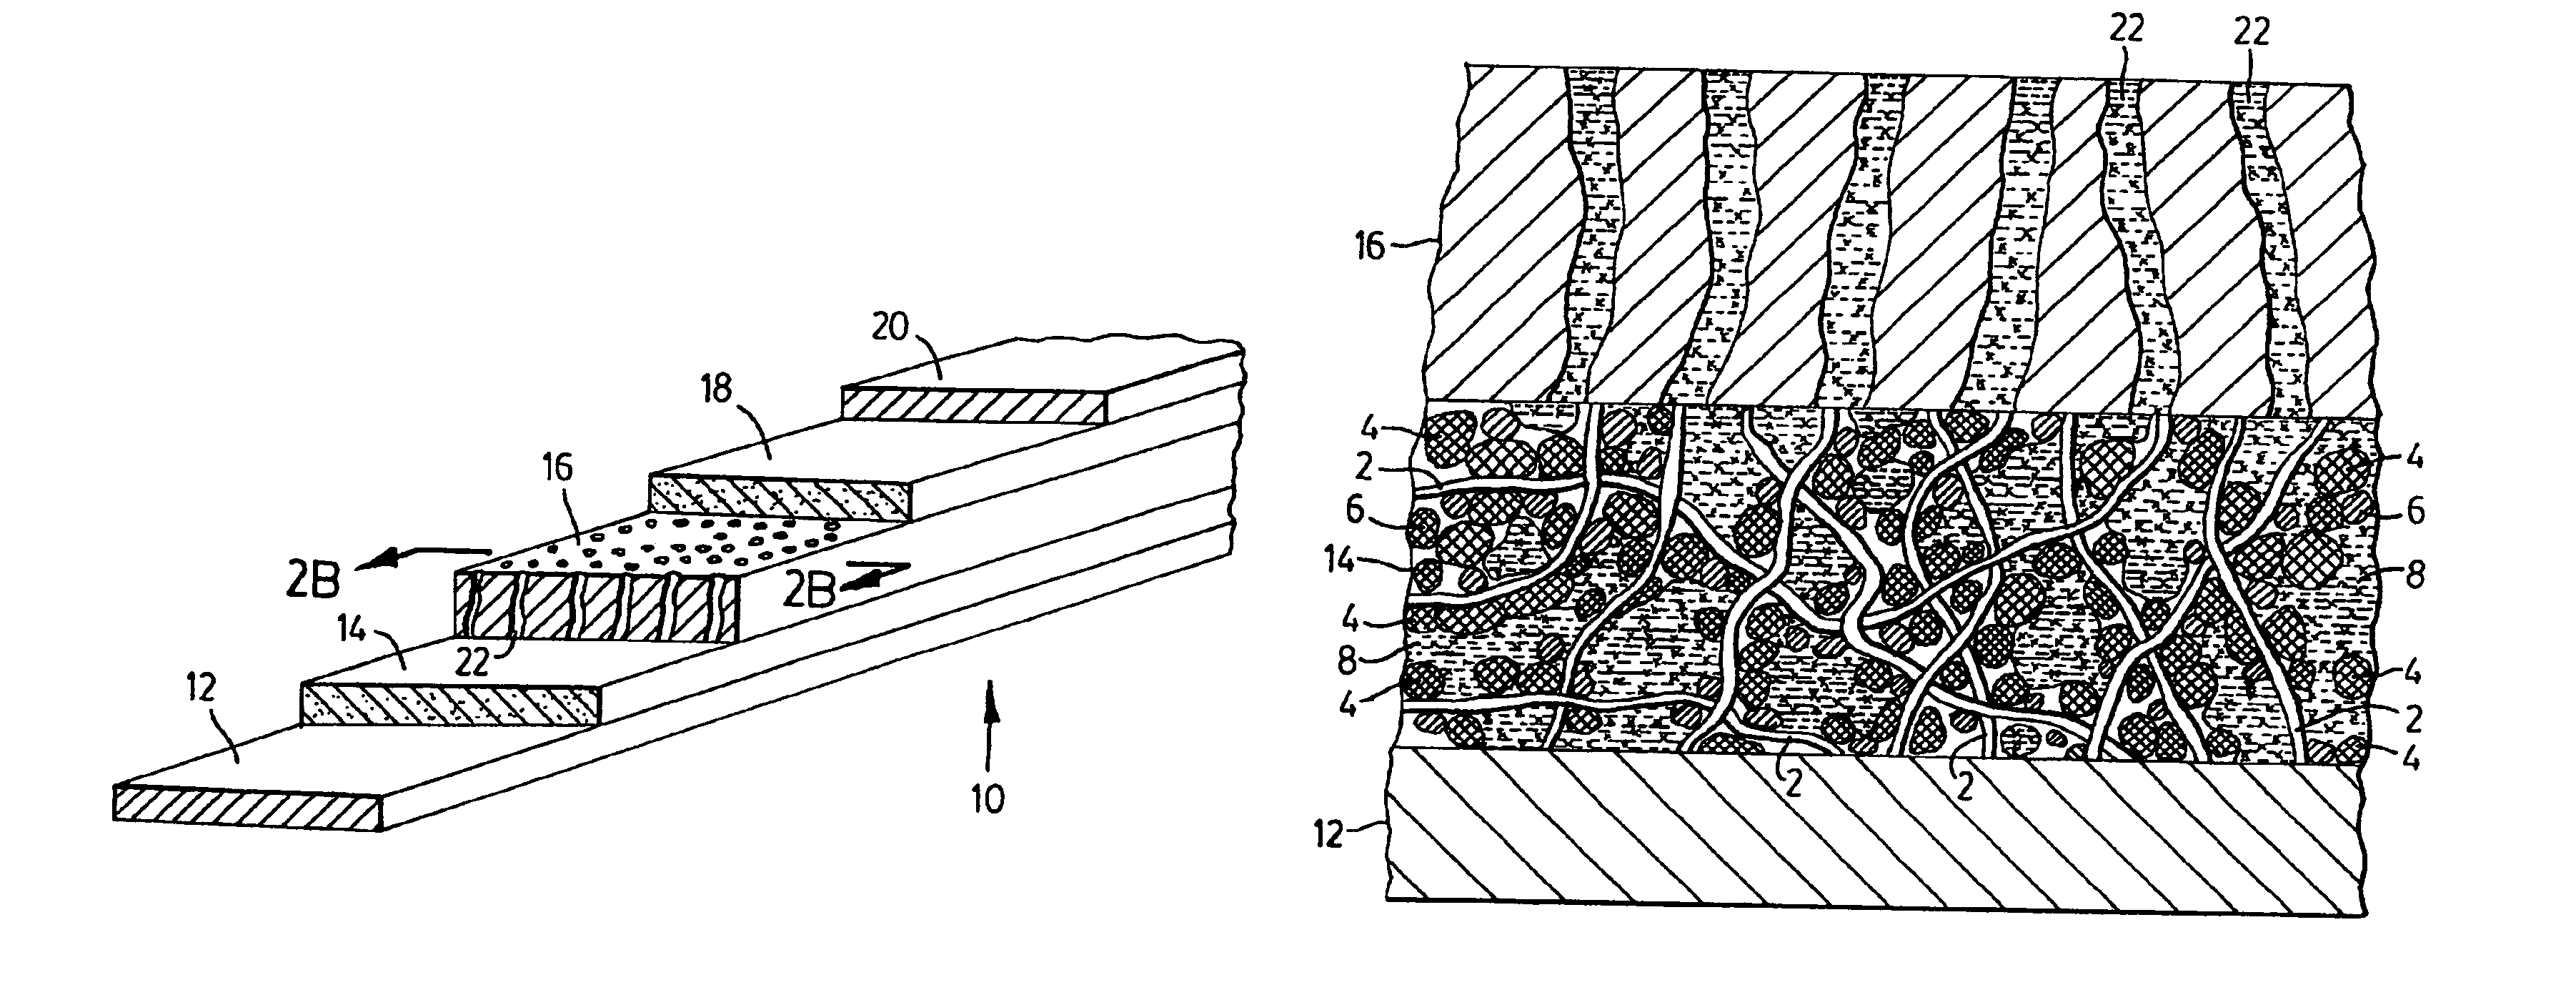 Particulate electrode including electrolyte for a rechargeable lithium battery